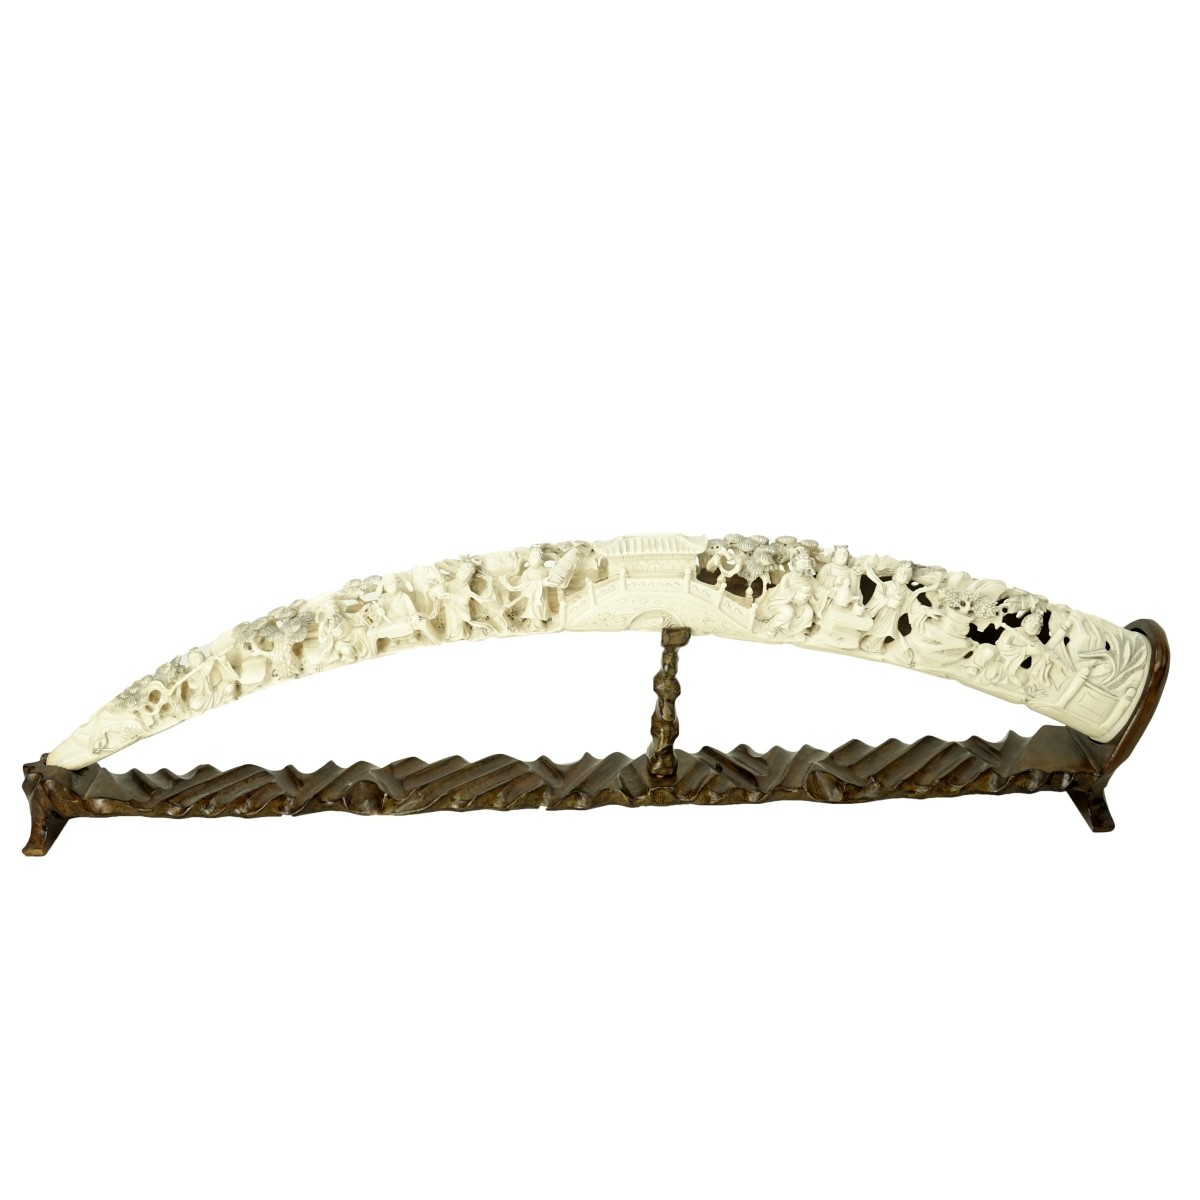 19th C. Chinese Deep Relief Carved Ivory Tusk